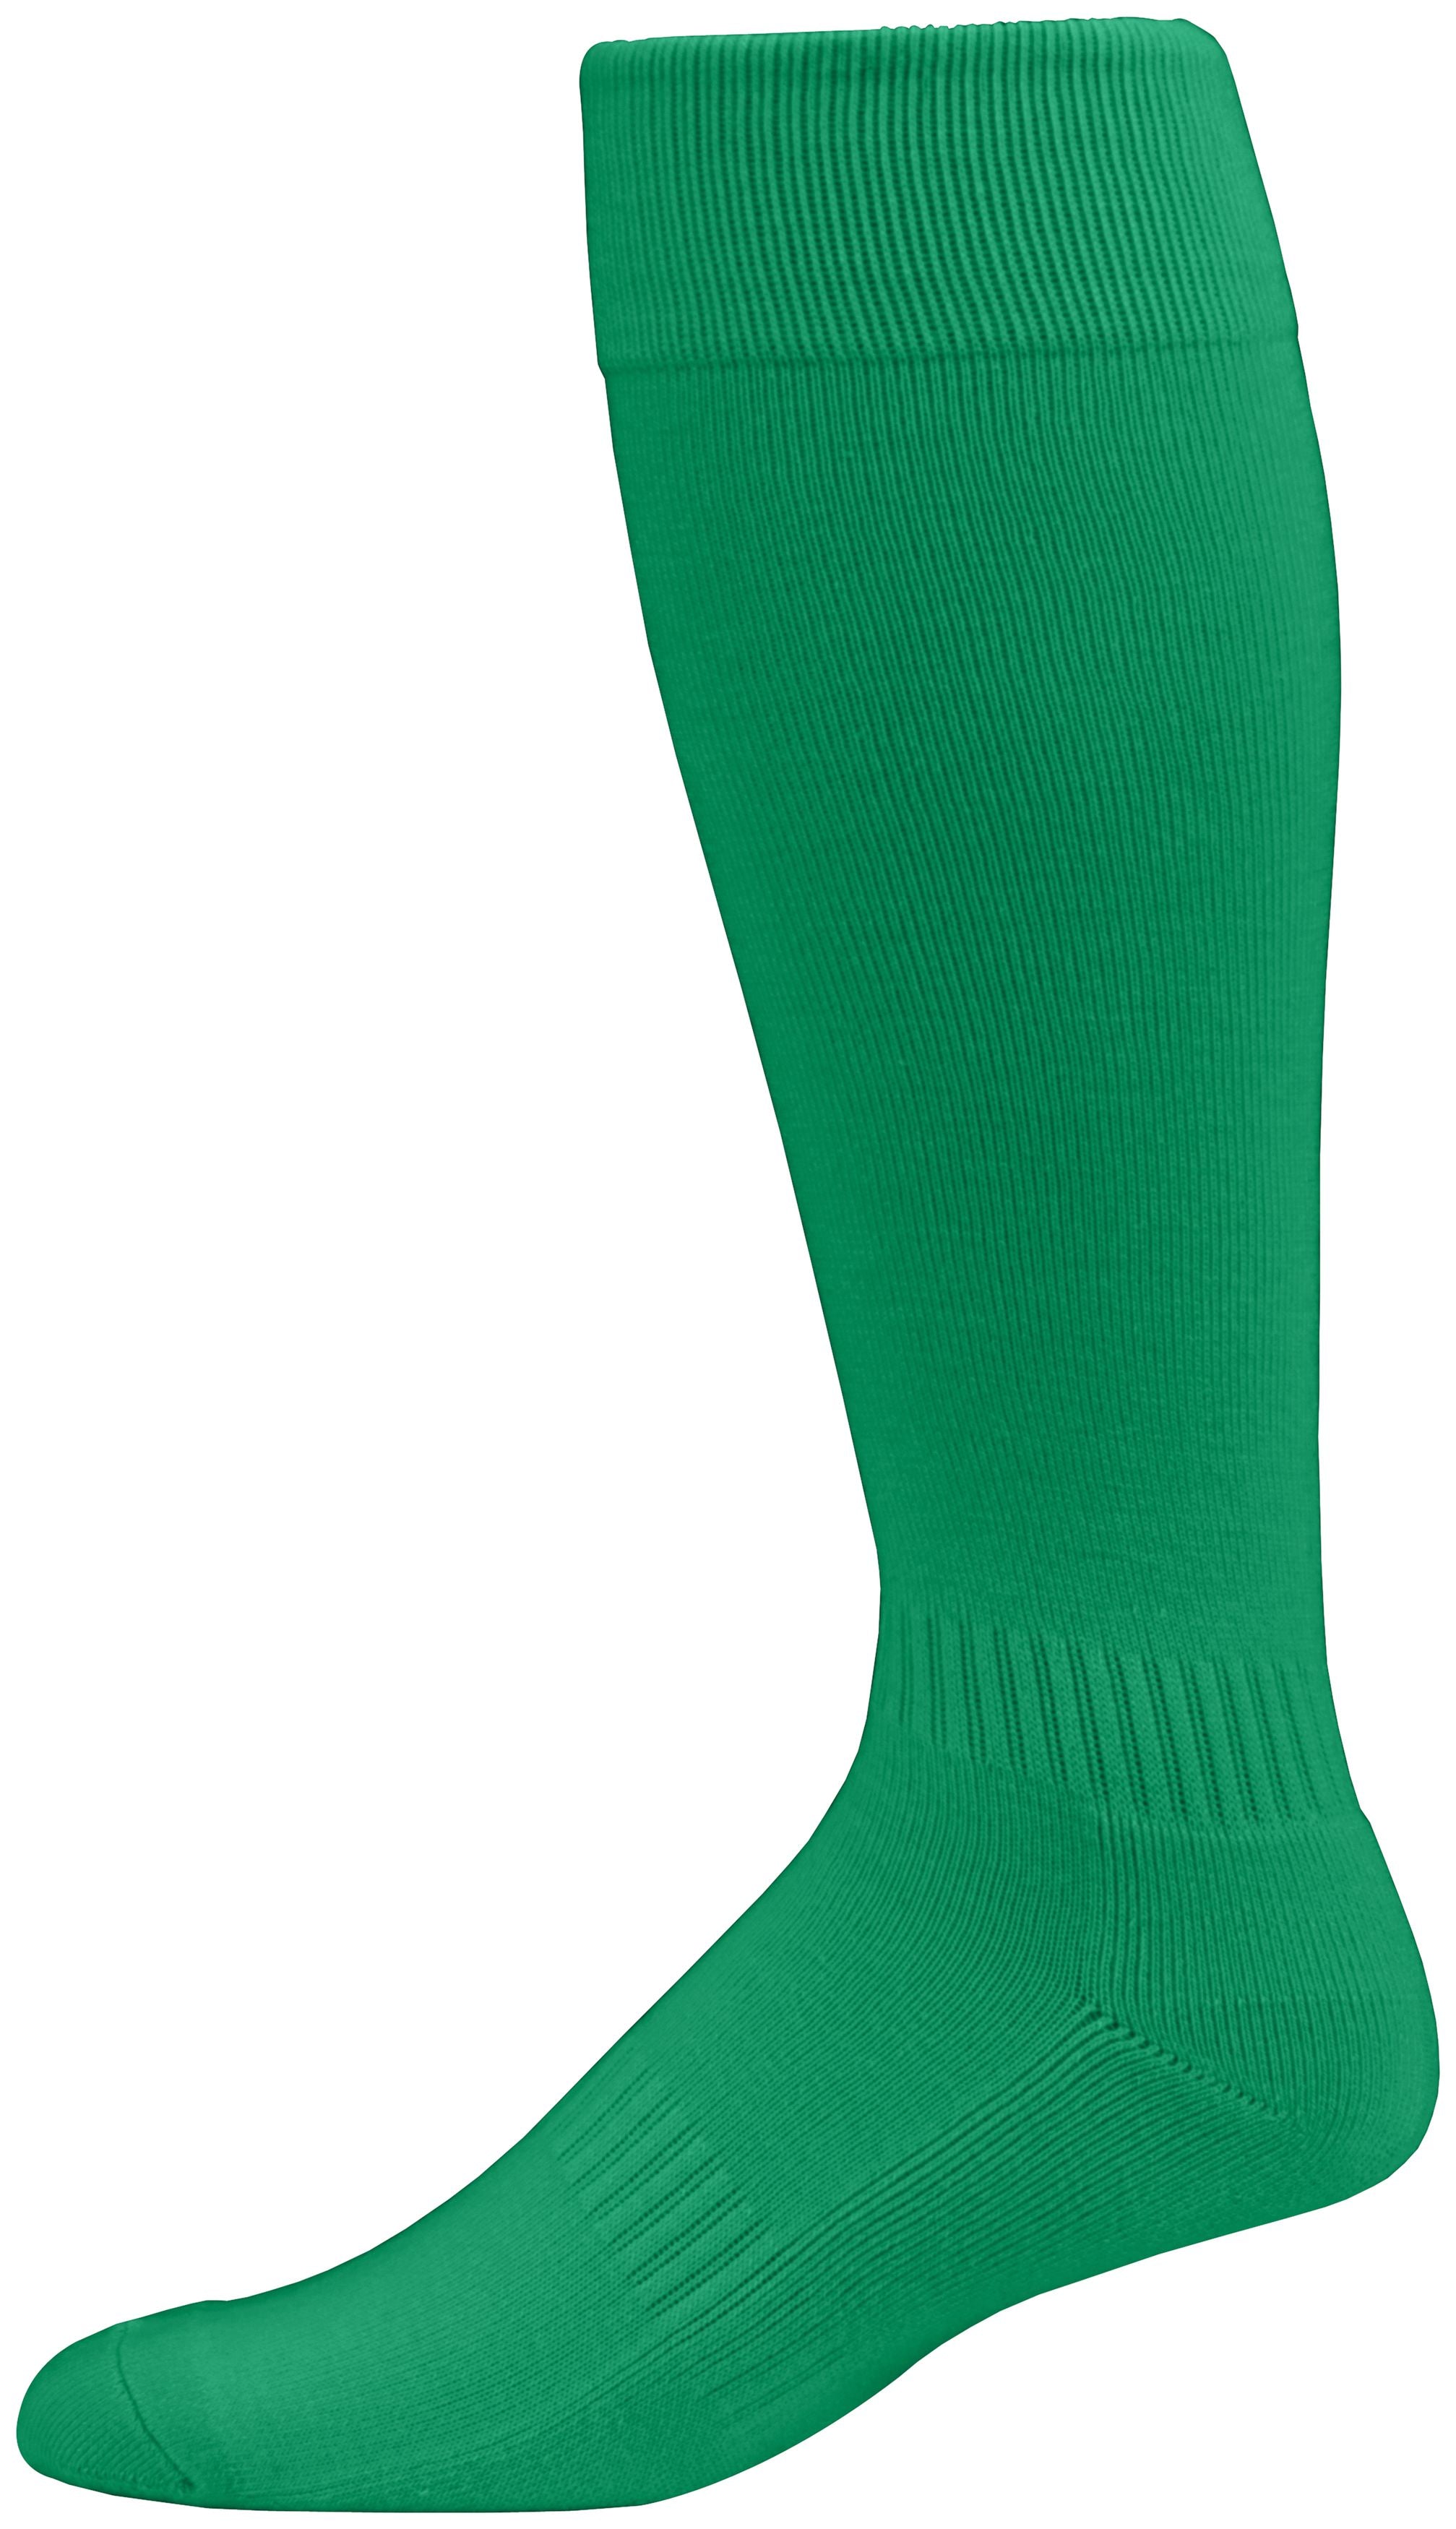 Augusta Sportswear Elite Multi-Sport Sock in Kelly  -Part of the Accessories, Augusta-Products, Accessories-Socks product lines at KanaleyCreations.com